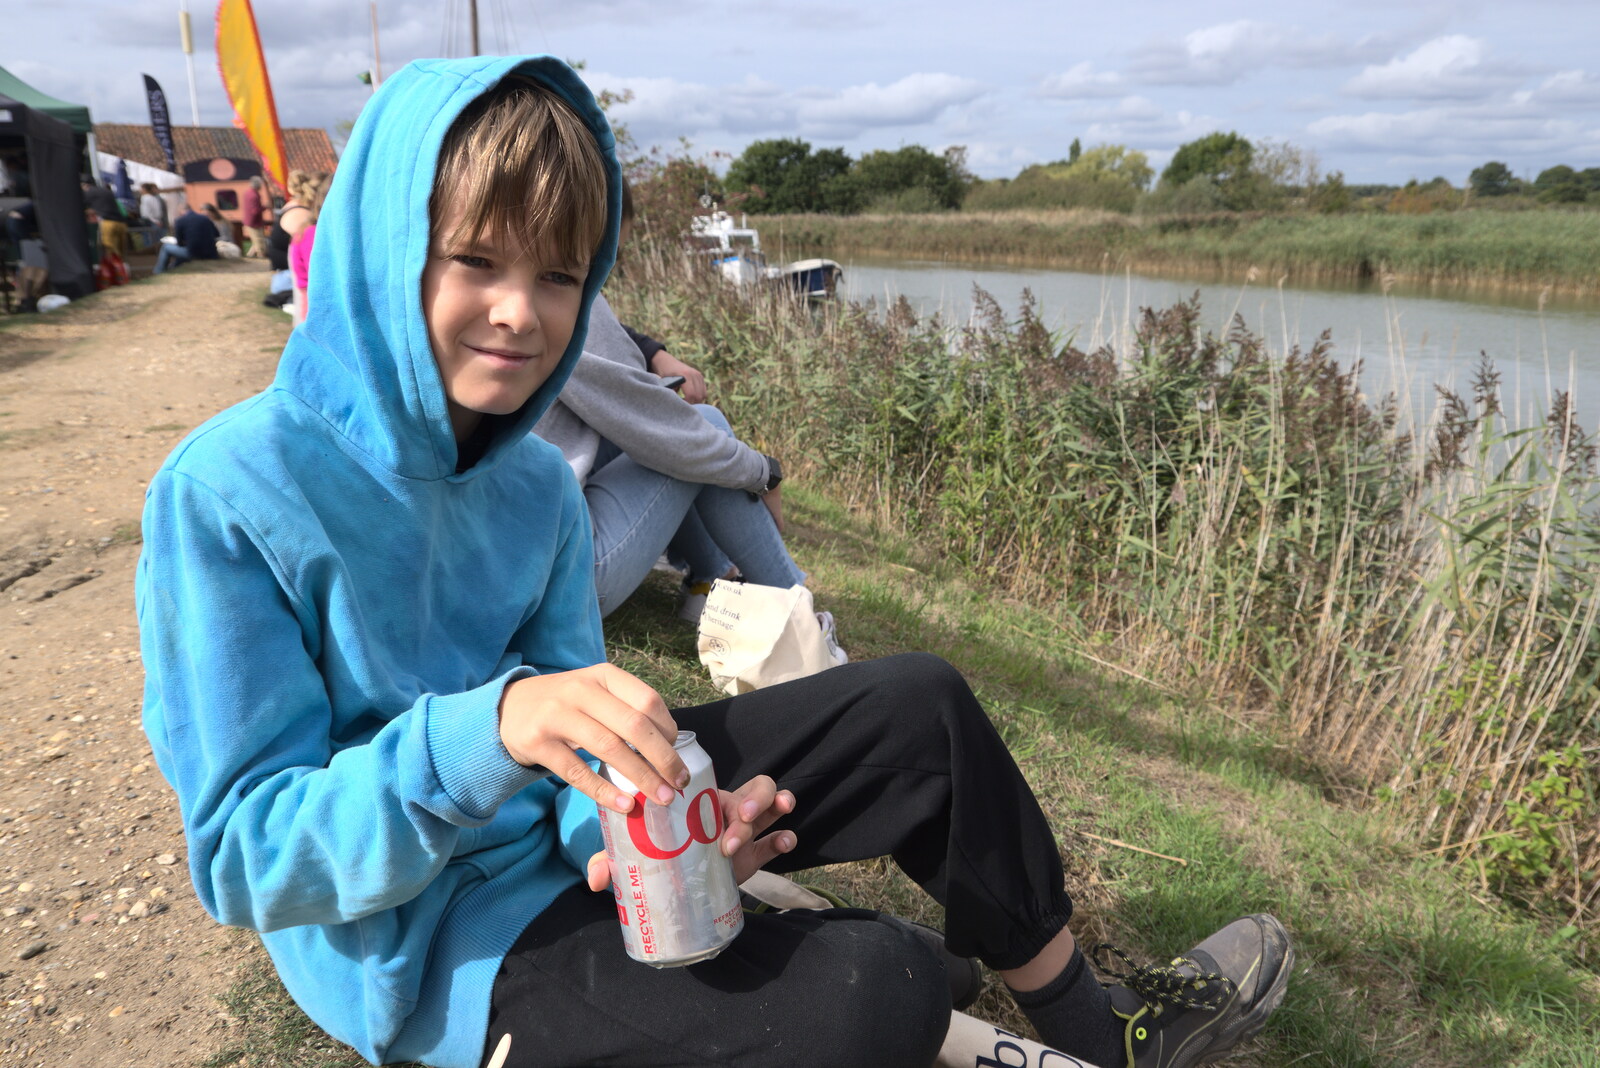 Harry eats macaroni and cheese by the river from The Aldeburgh Food Festival, Snape Maltings, Suffolk - 25th September 2022